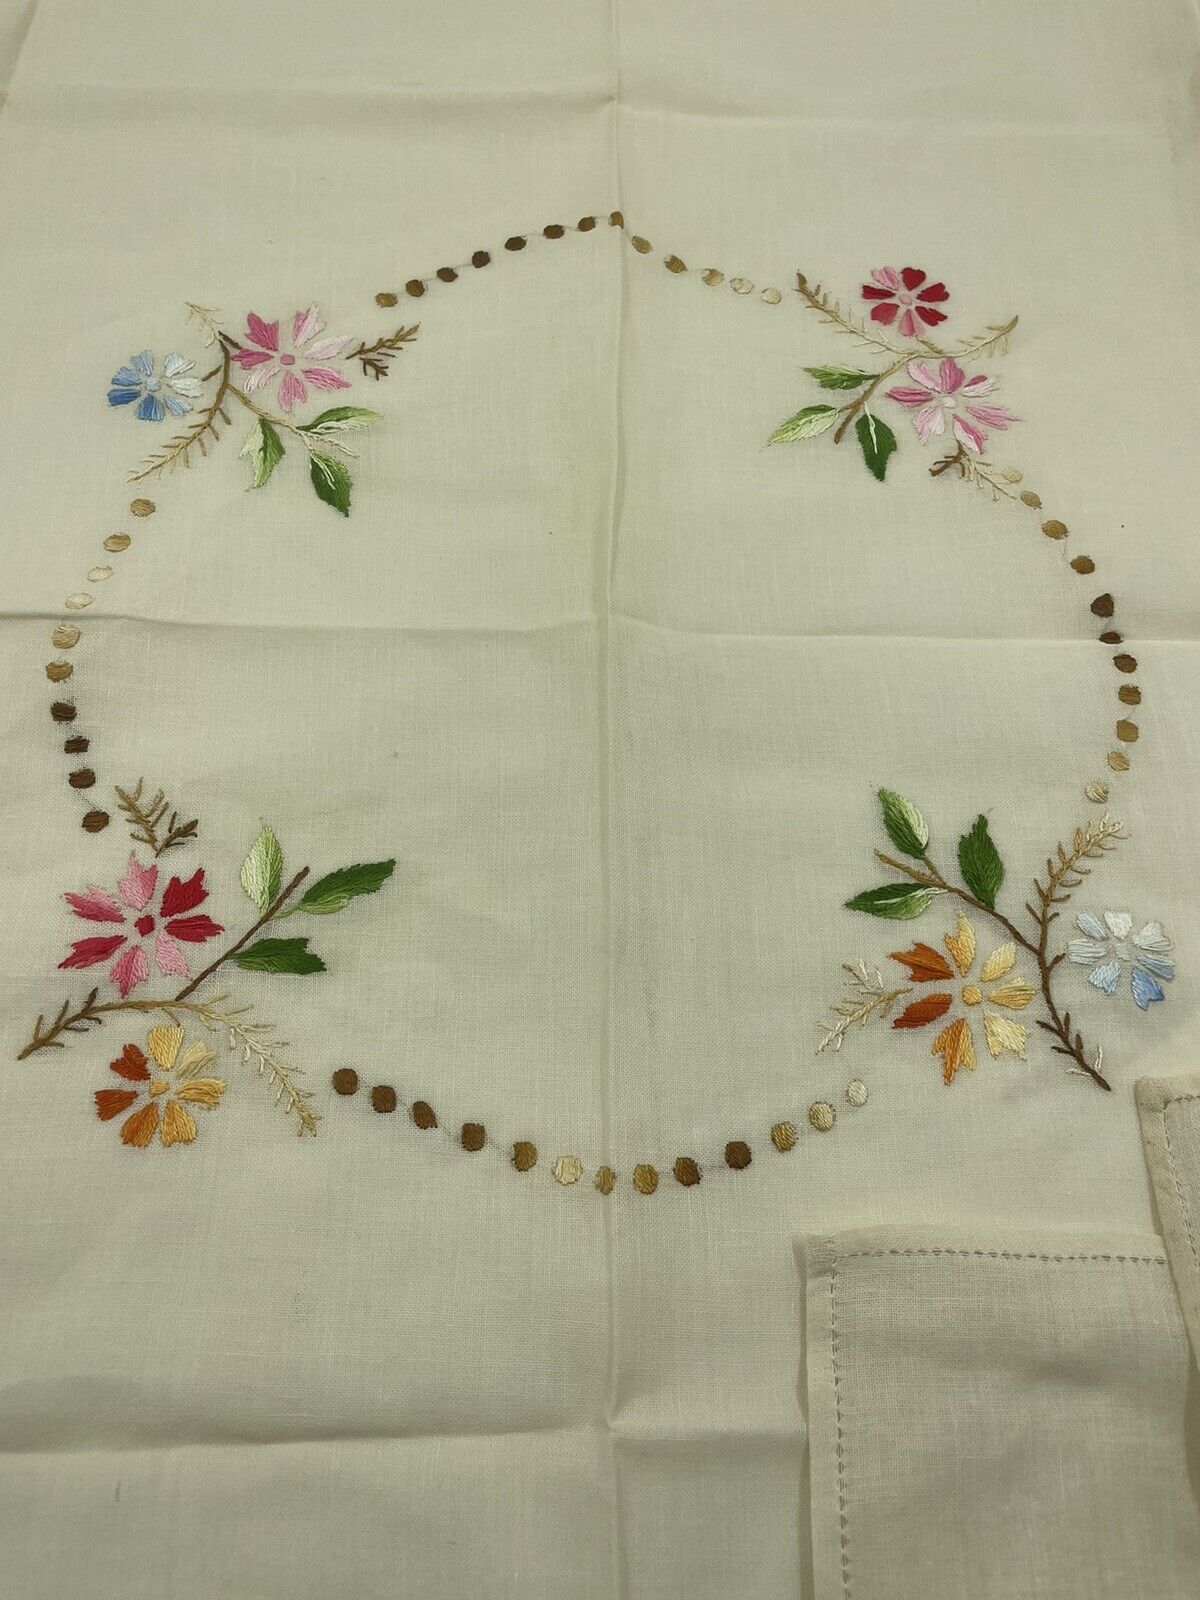 Vintage Needlepoint Embroidery Floral Tablecloth Topper 32”x33” w/ 5 Napkins